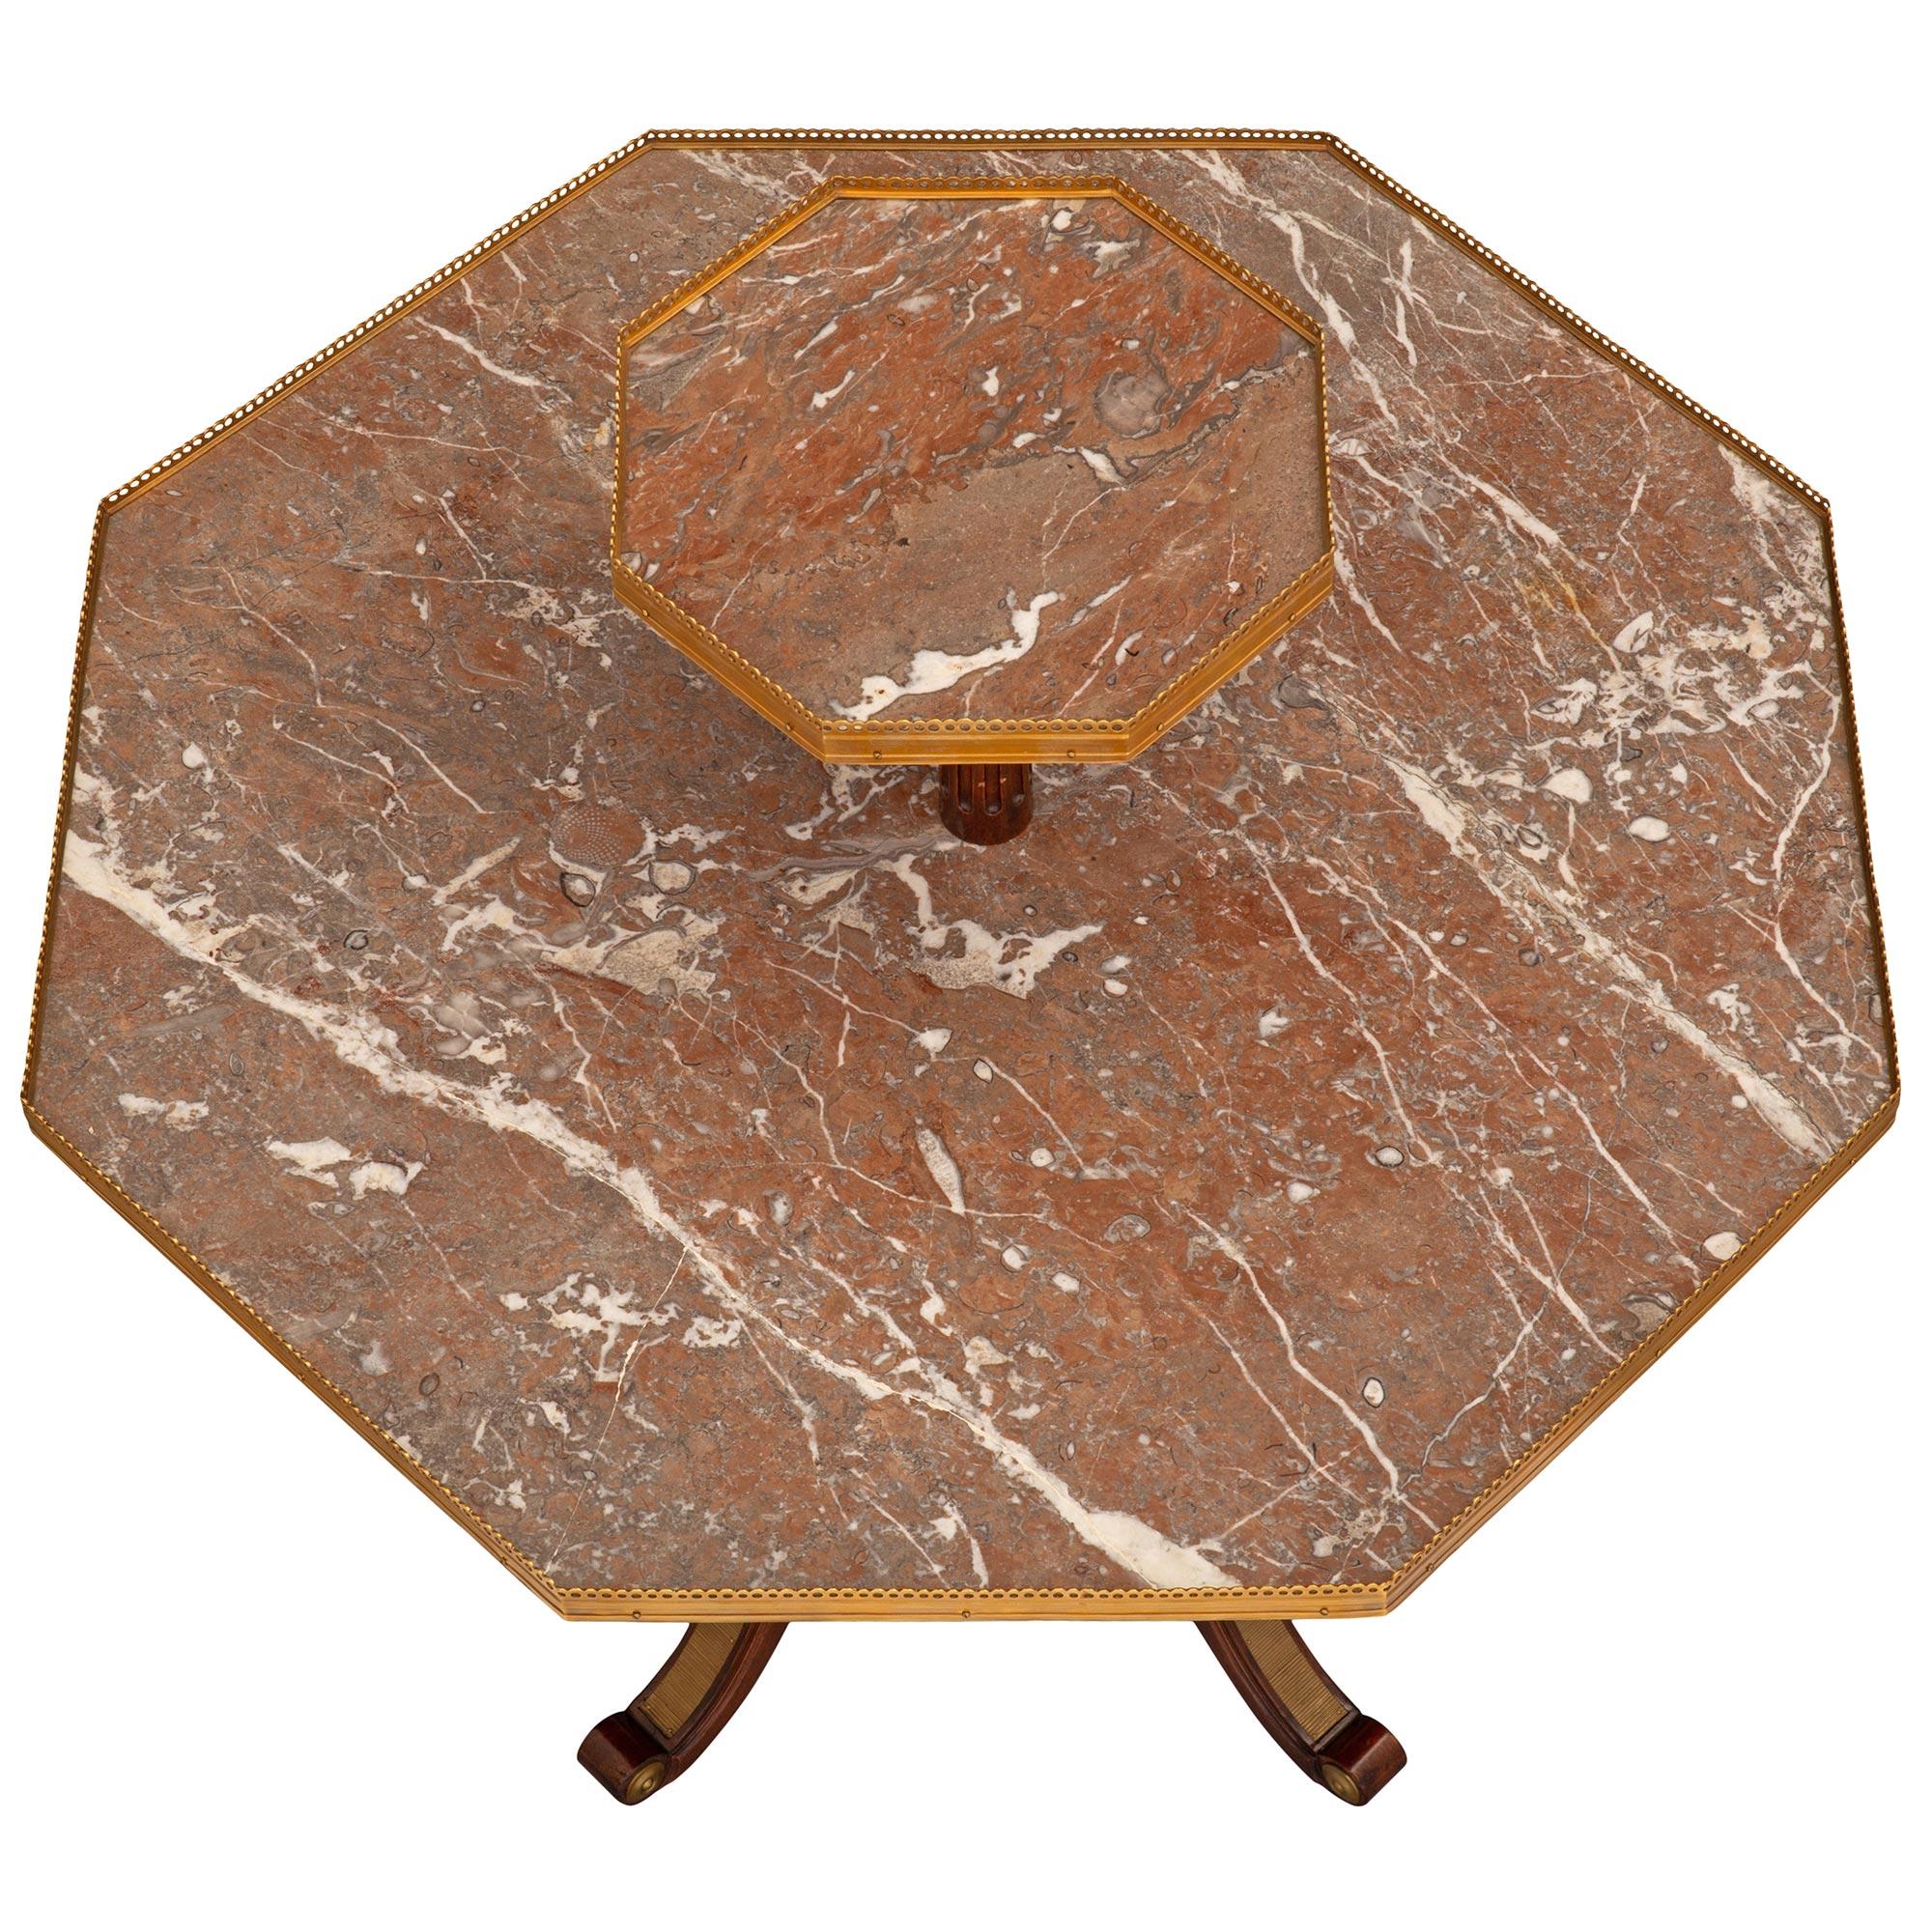 A uniquely shaped and most attractive French 19th century Louis XVI st. Mahogany, ormolu, and Coquillier de Bilbao marble table. The octagonal two tiered table is raised by four elegant scrolled legs with fine mottled ormolu cabochons and fitted